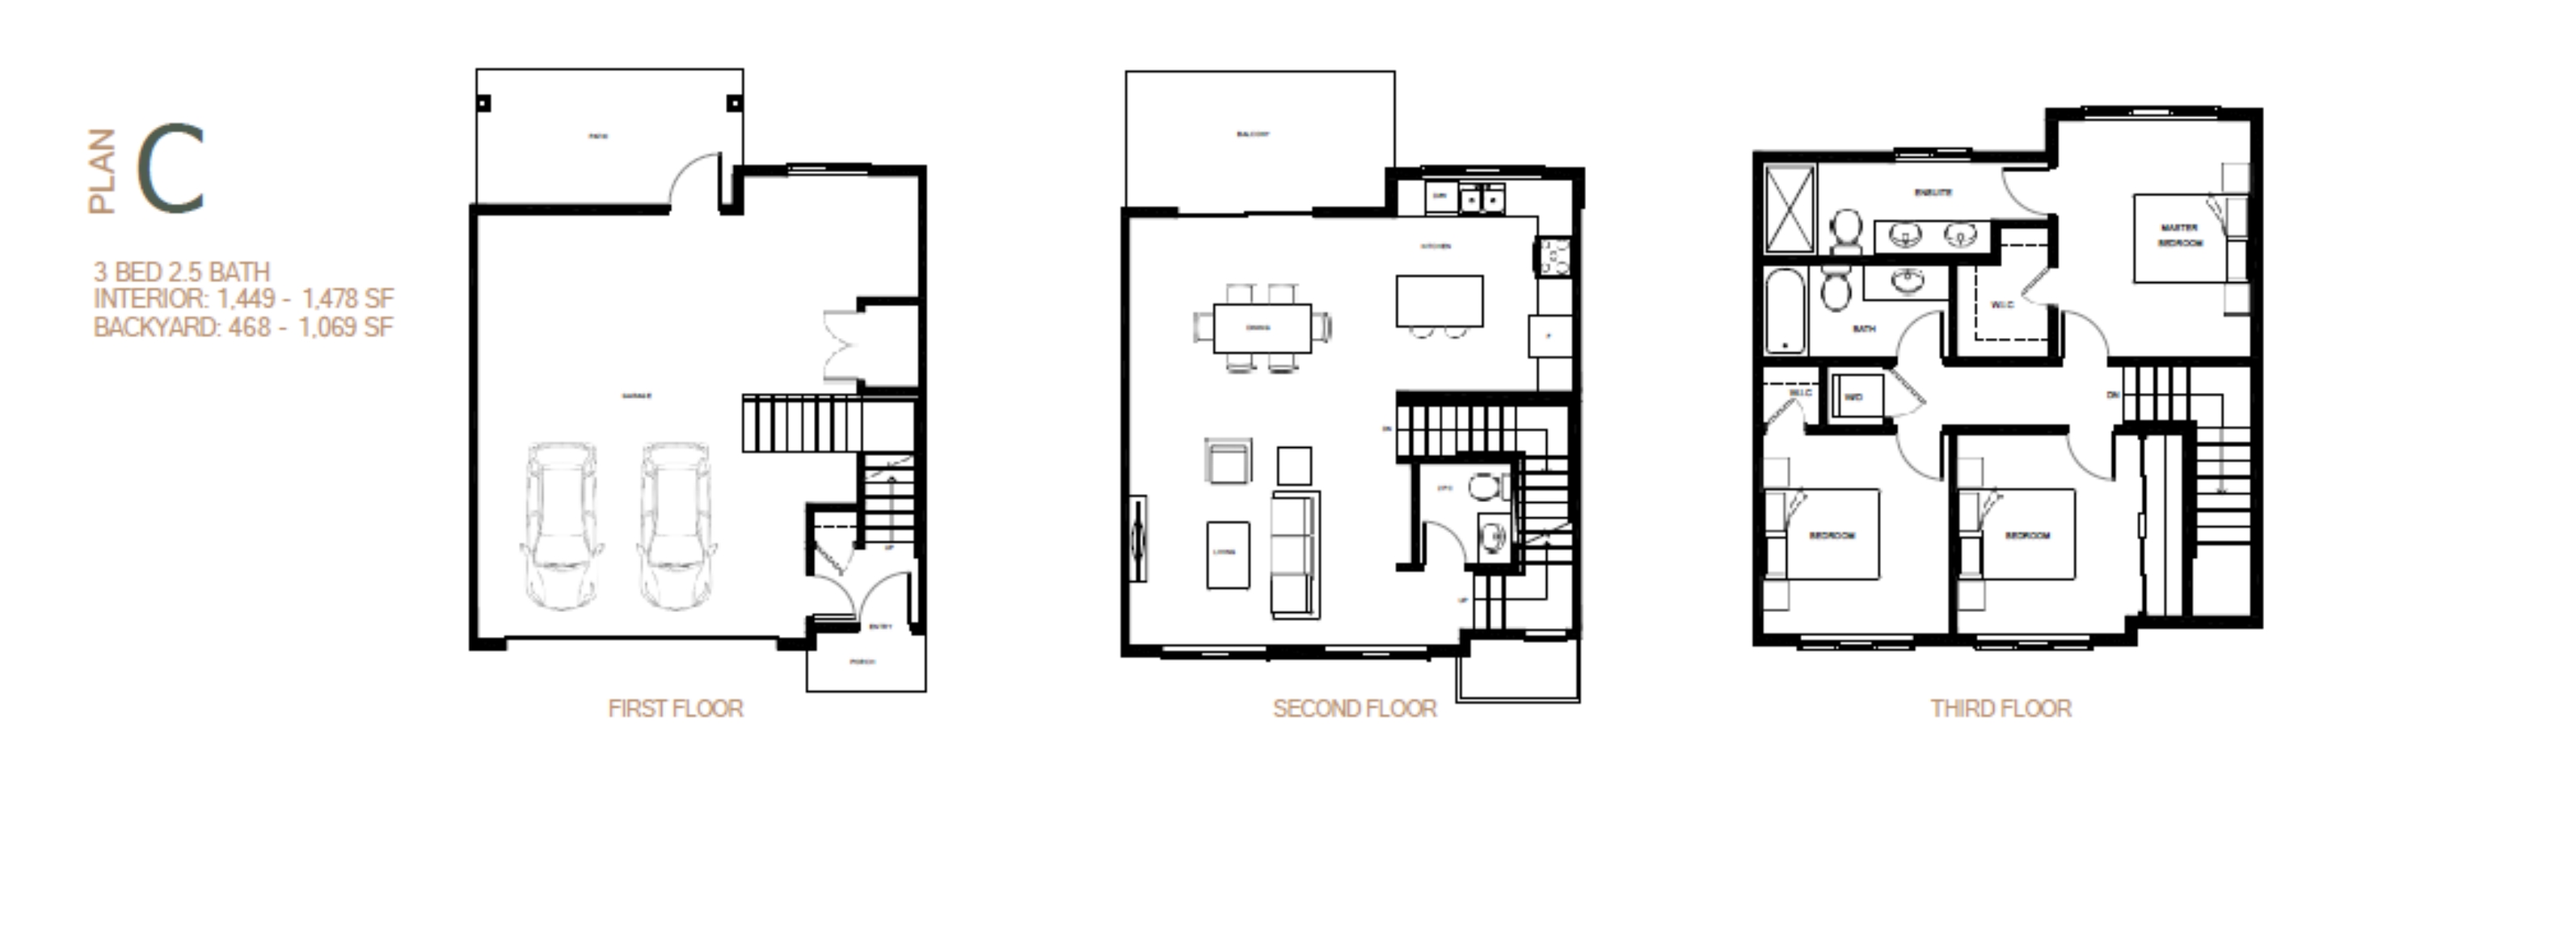 C Floor Plan of Park and Maven Towns with undefined beds